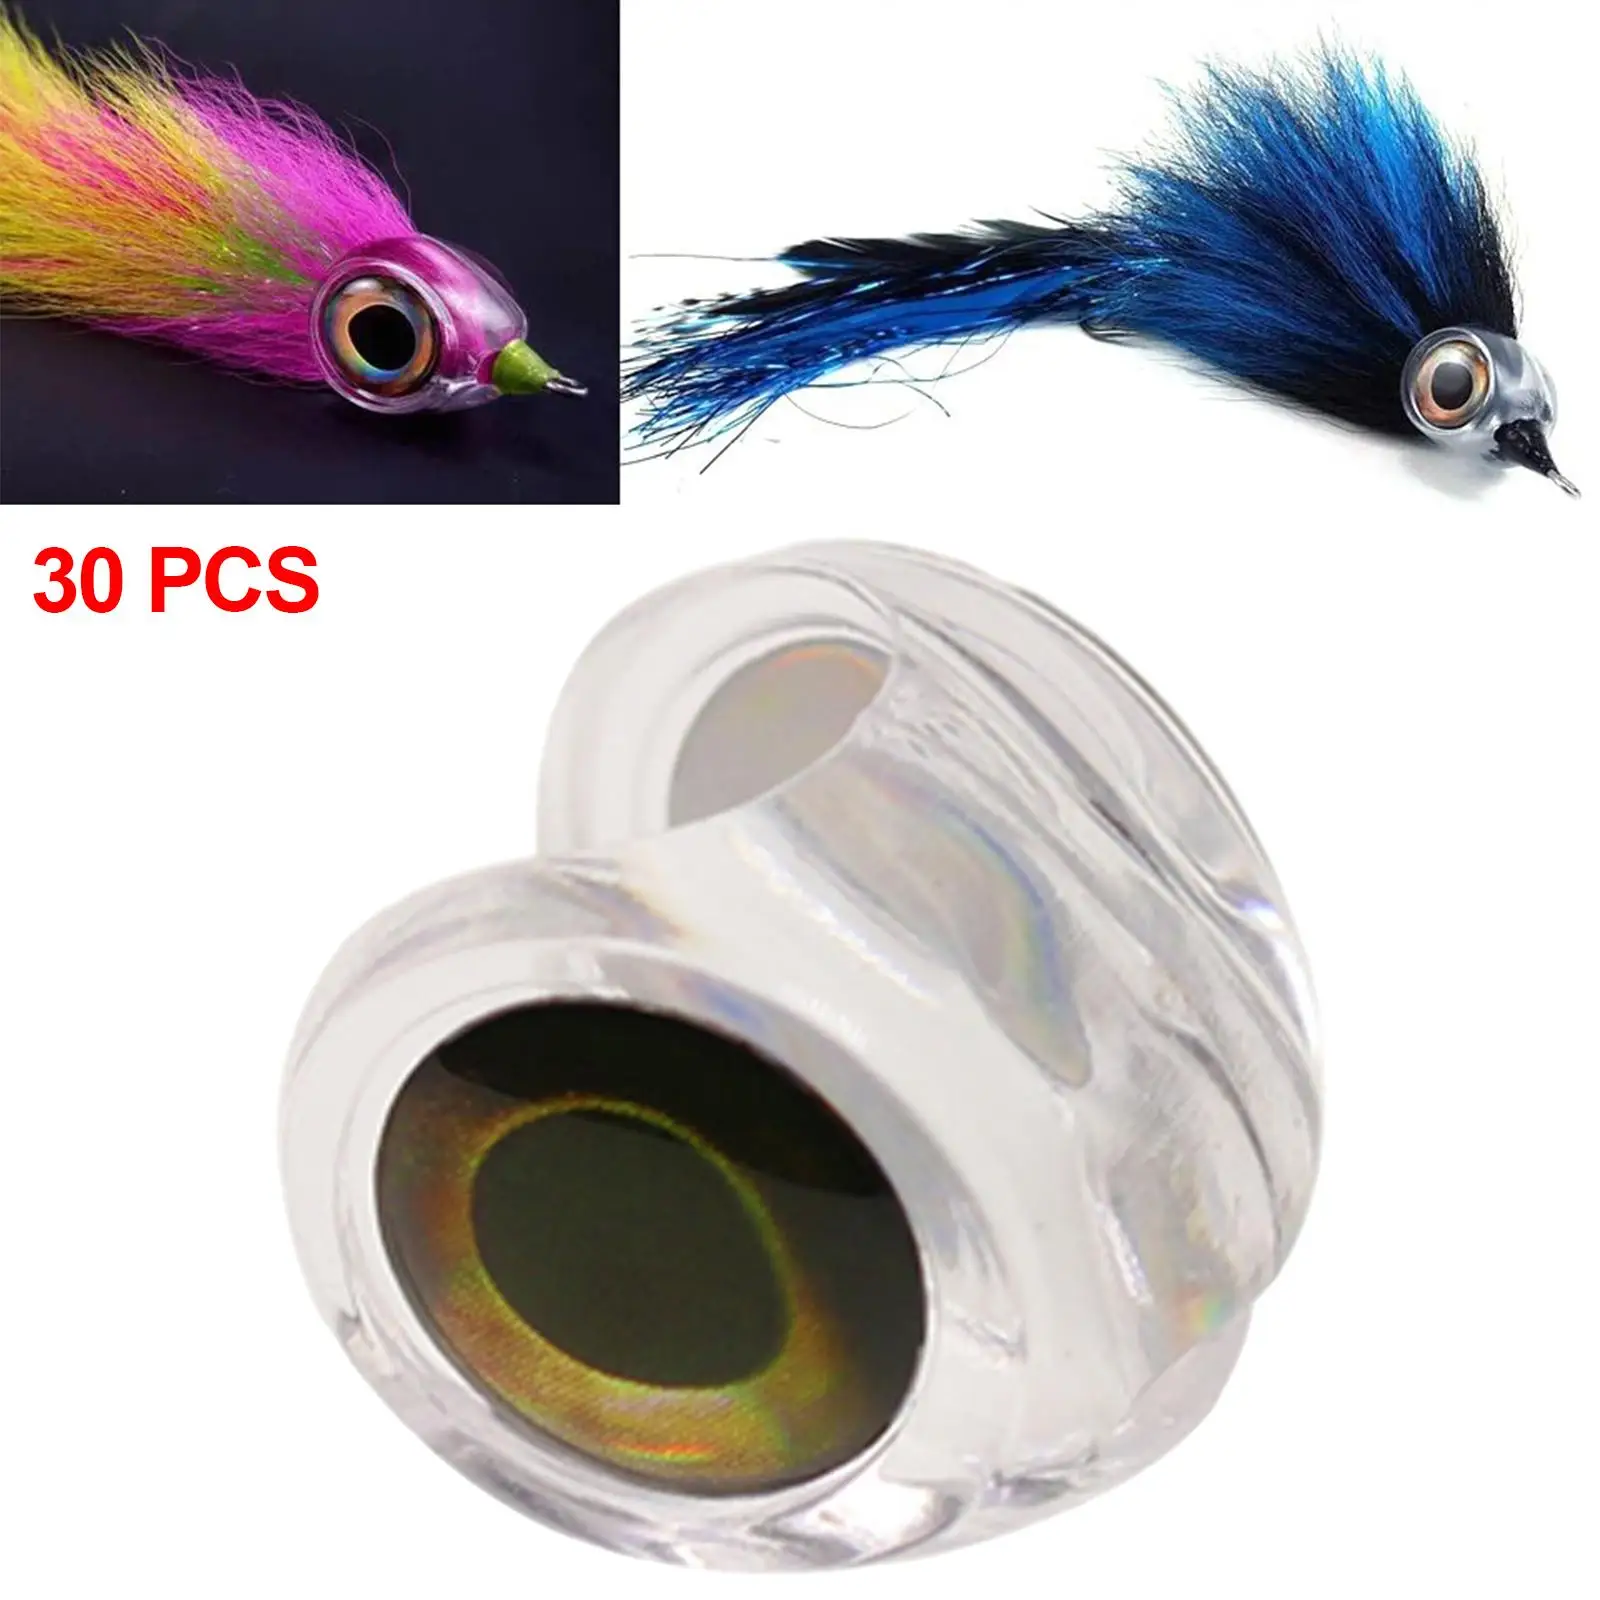 30 Pieces Fly Tying Fish Mask Make Streamer Crafts Durable Bait for Outdoor